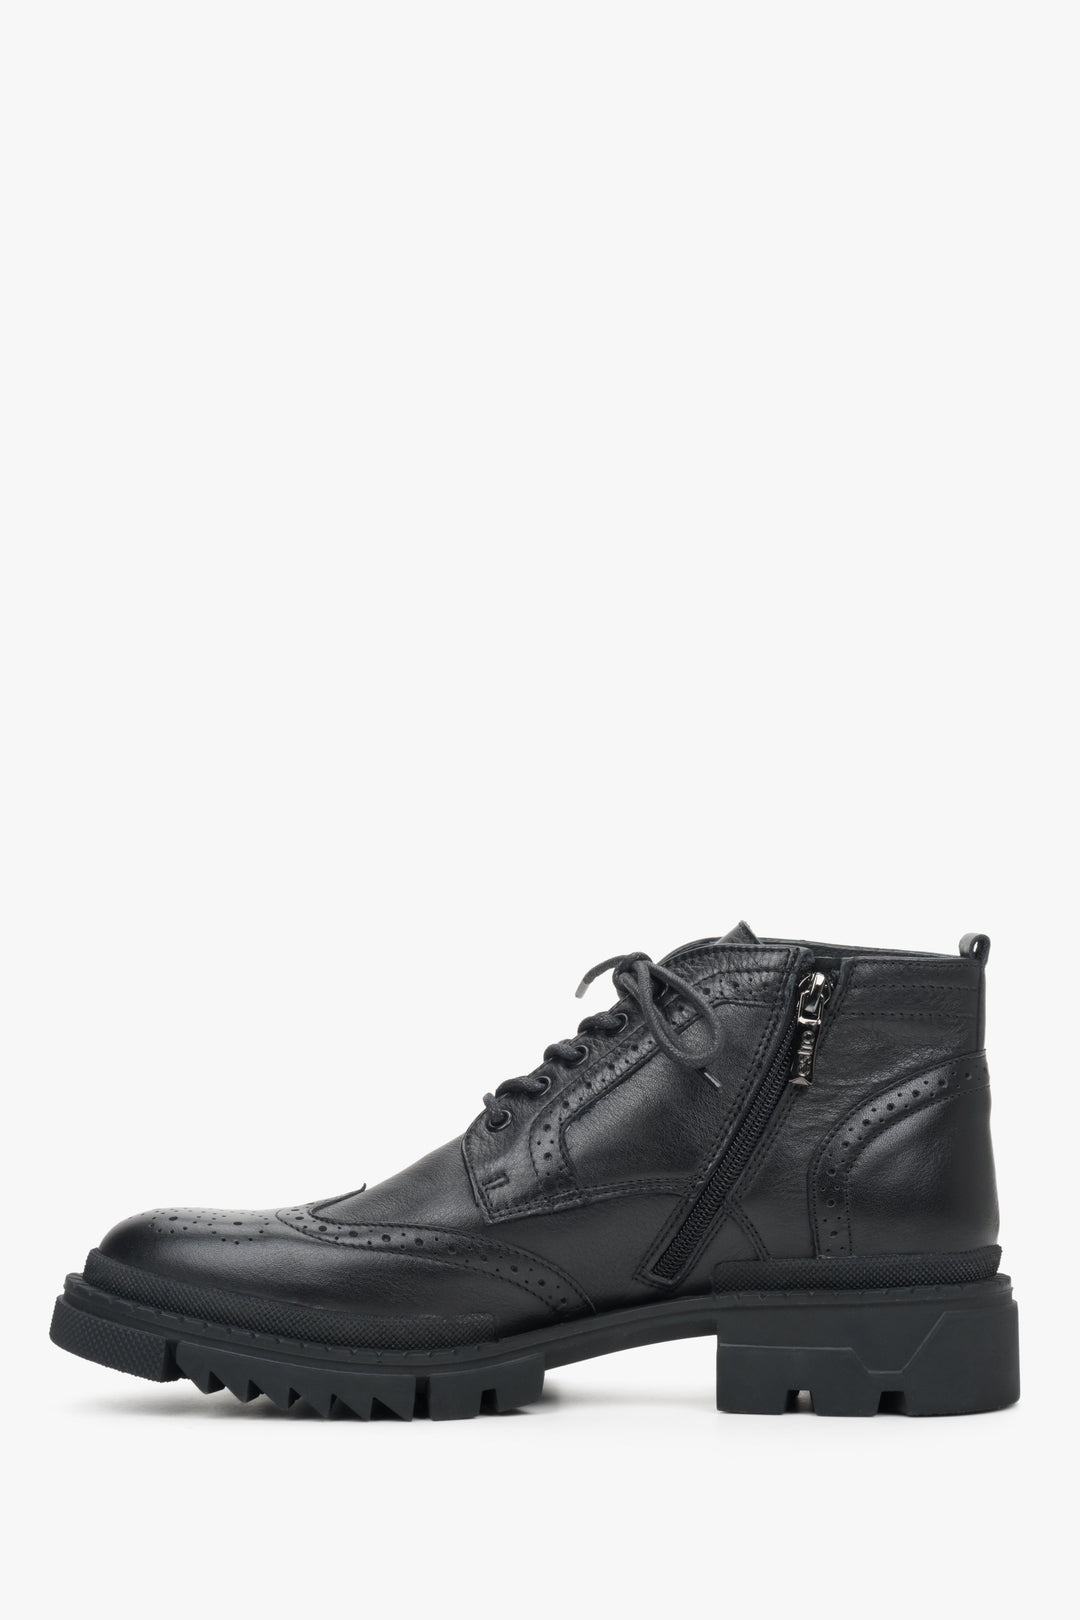 Estro men's winter lace-up boots - preview of the shoe profile in black.